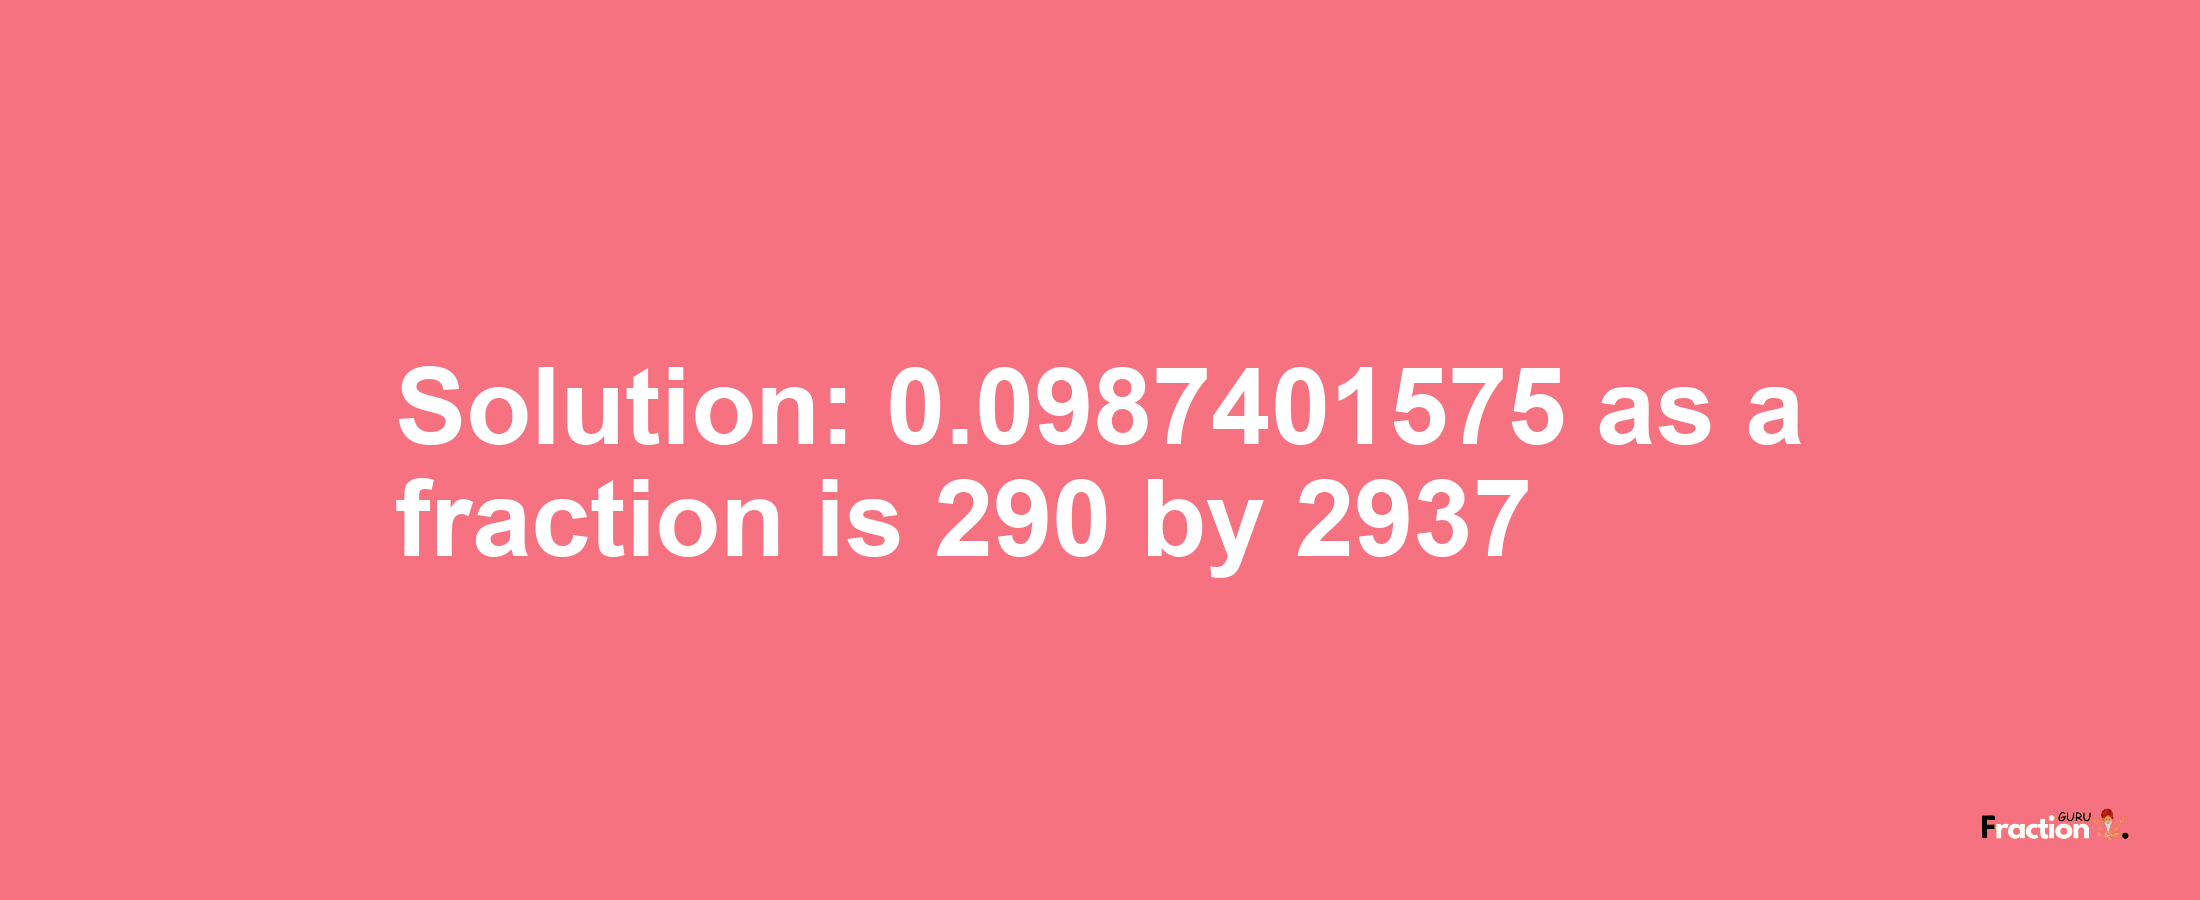 Solution:0.0987401575 as a fraction is 290/2937